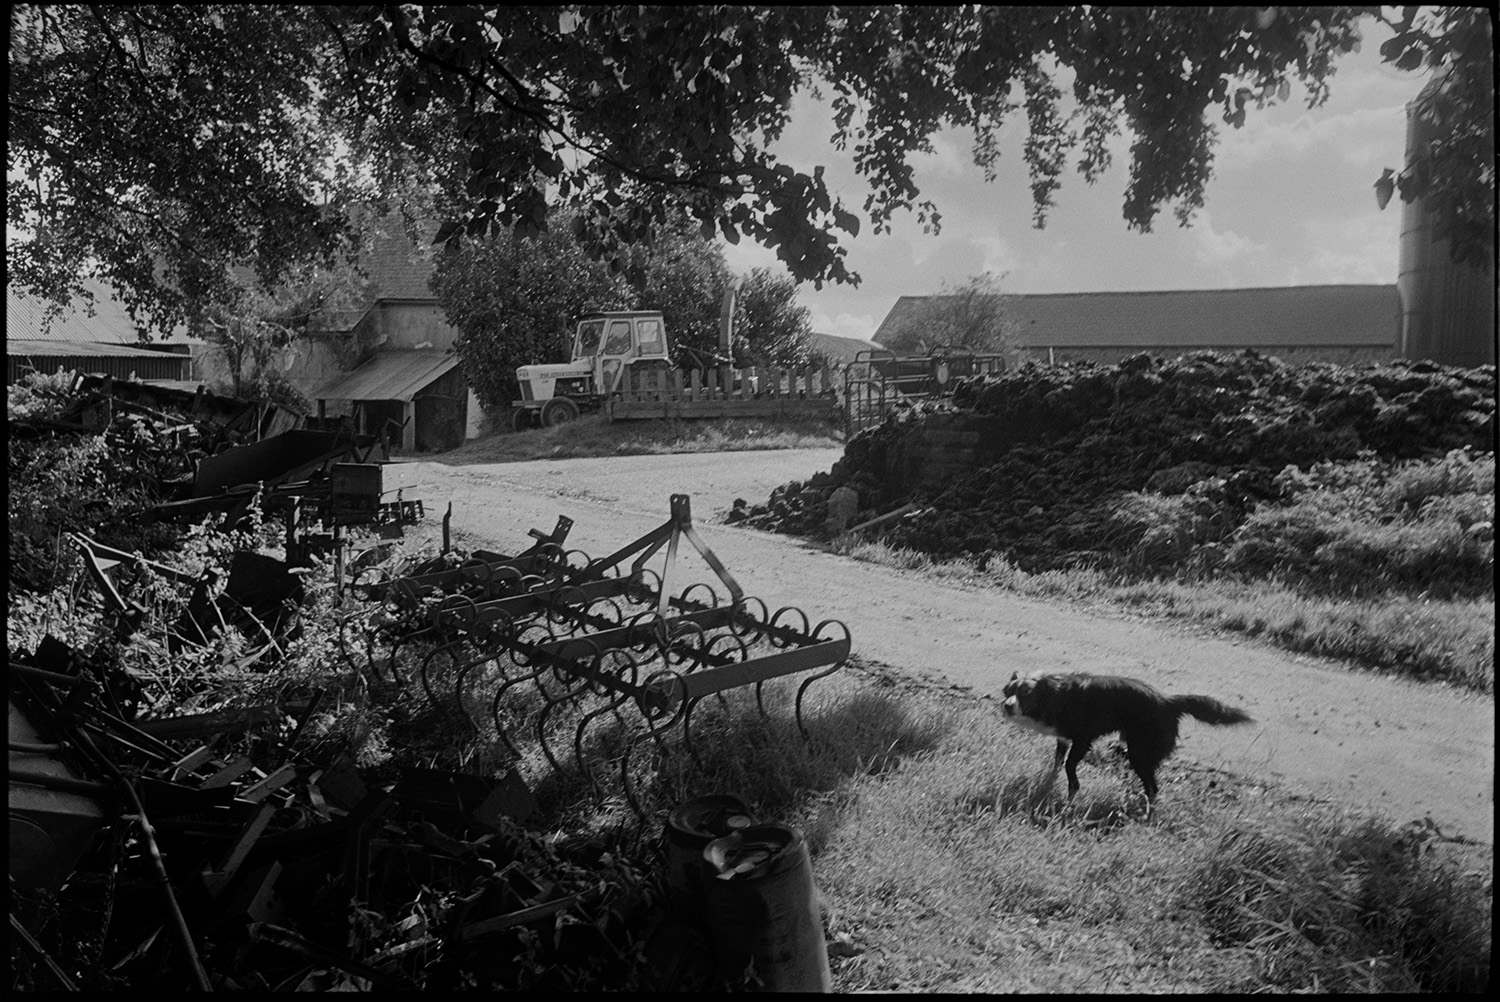 Dog barking in farm lane with parked harrow, old bulldozer. 
[A dog stood next to an old harrow on the verge of a lane at Spittle Farm, Chulmleigh. A barn, tractor and a farm buildings can be seen in the background.]